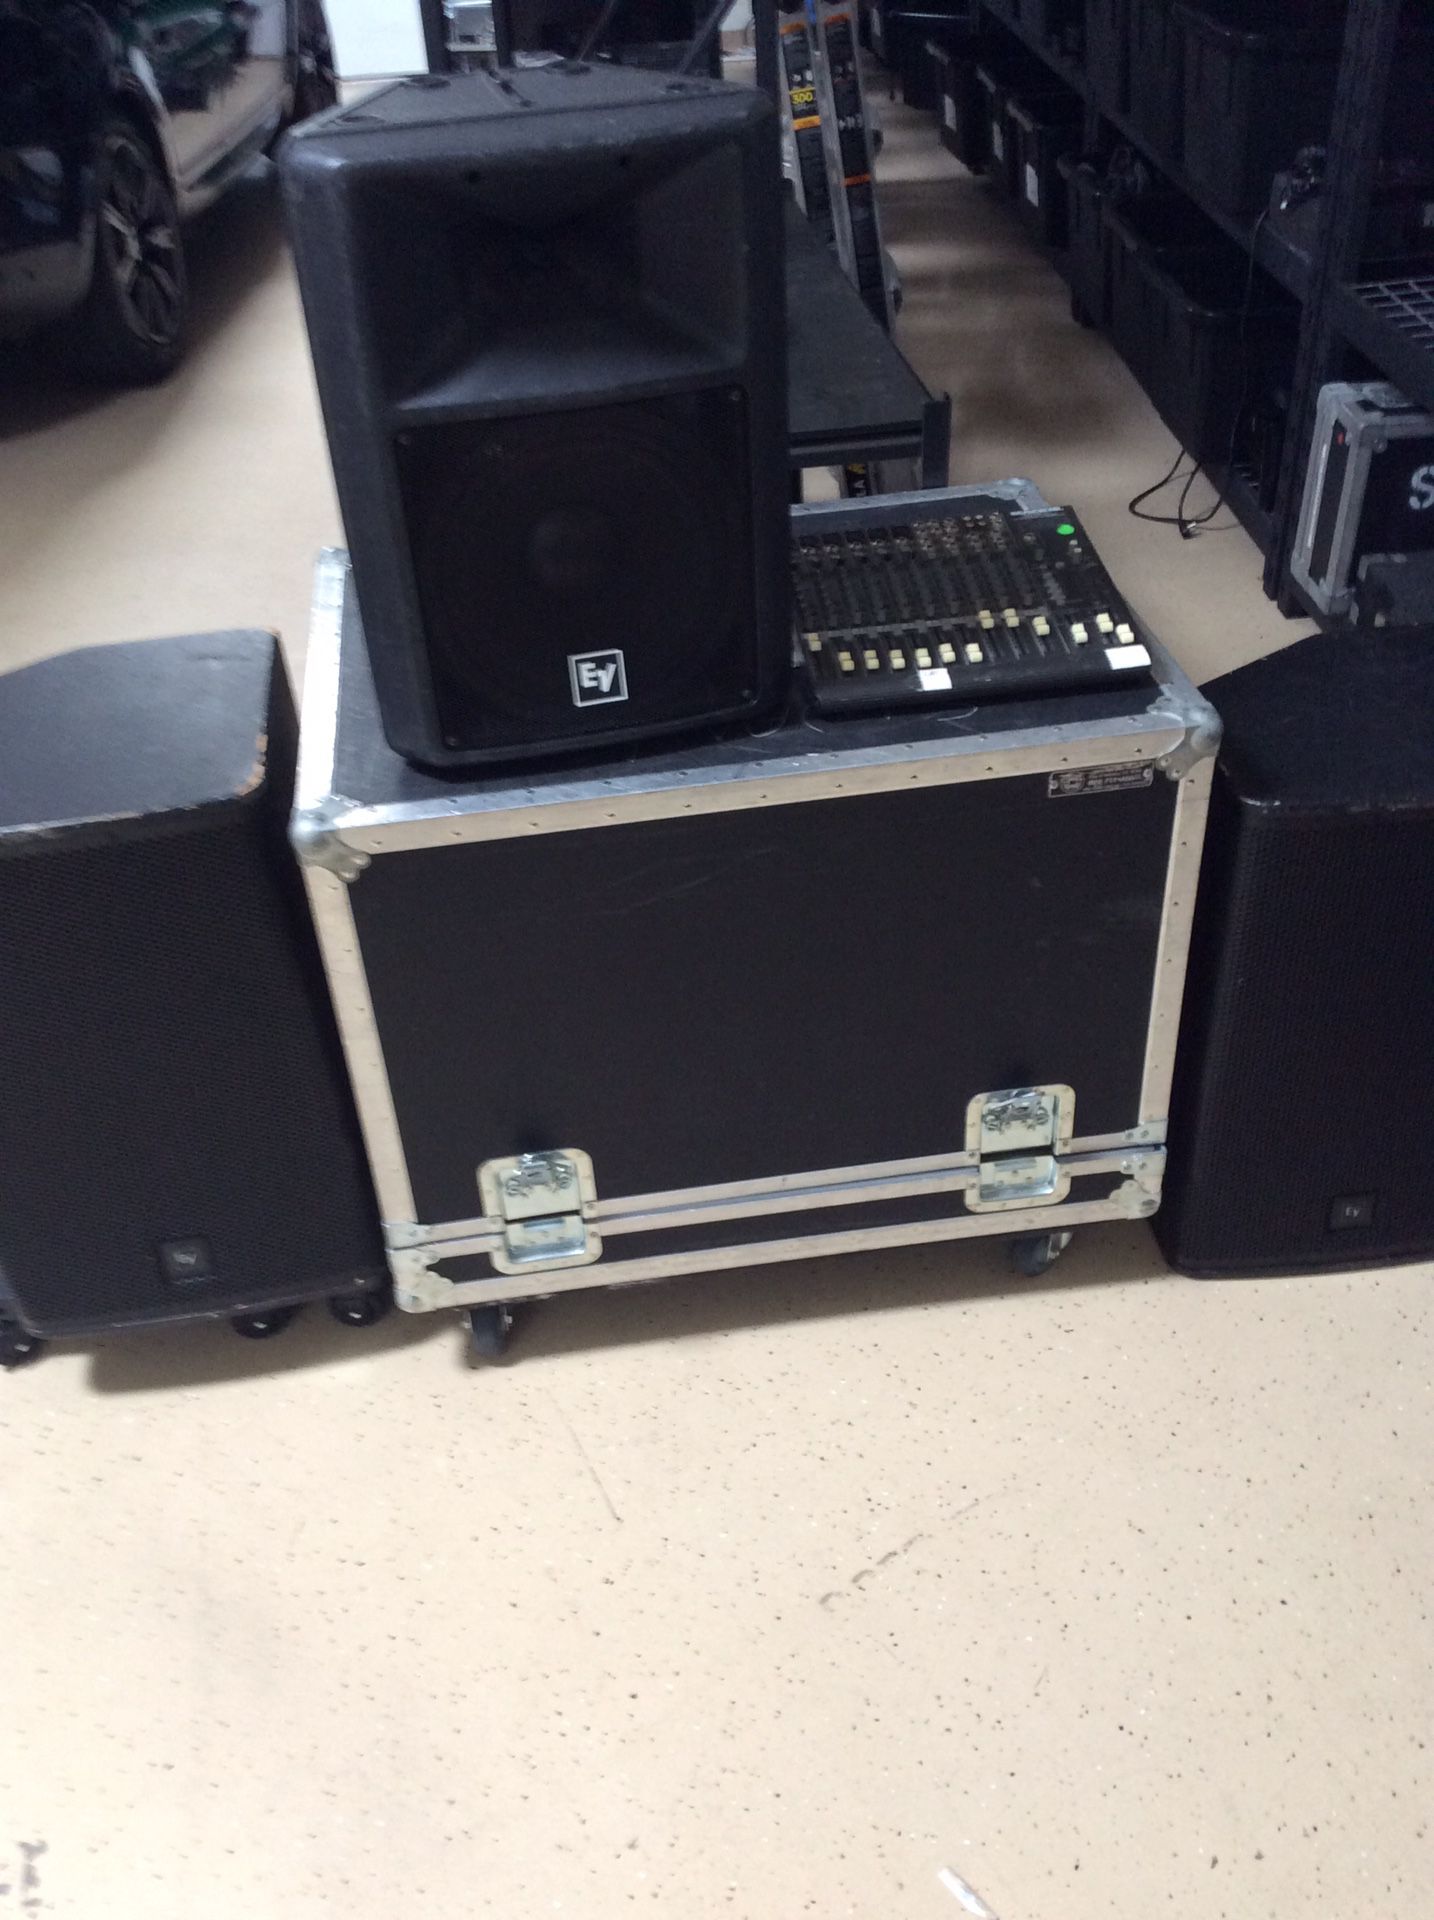 Professional audio starters kit 3 pro speakers, 1 concert level sub woofer and rolling case, with mixer for 500$ obo